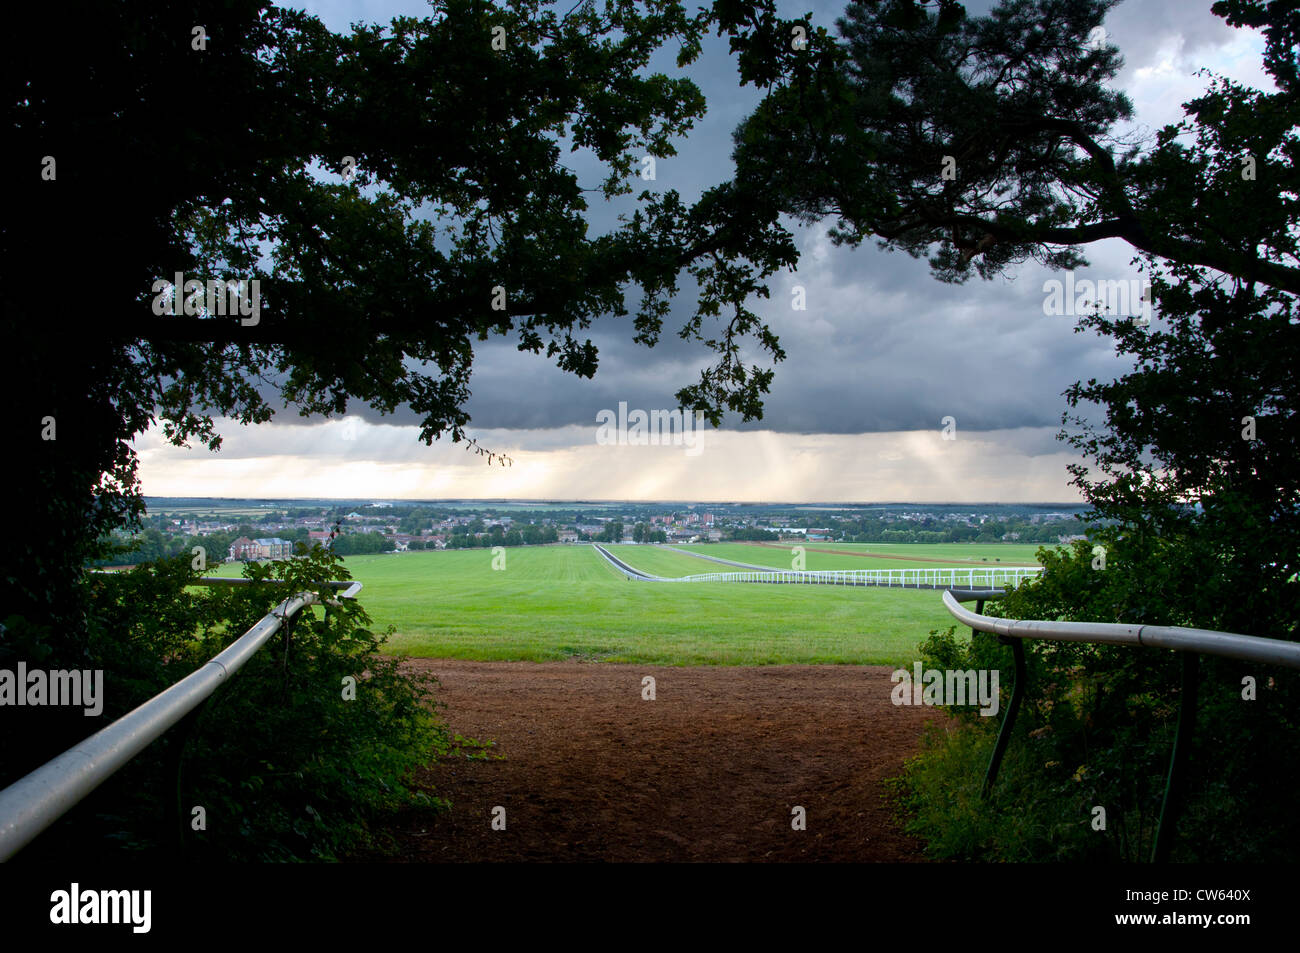 Storm clouds over Newmarket gallops Stock Photo